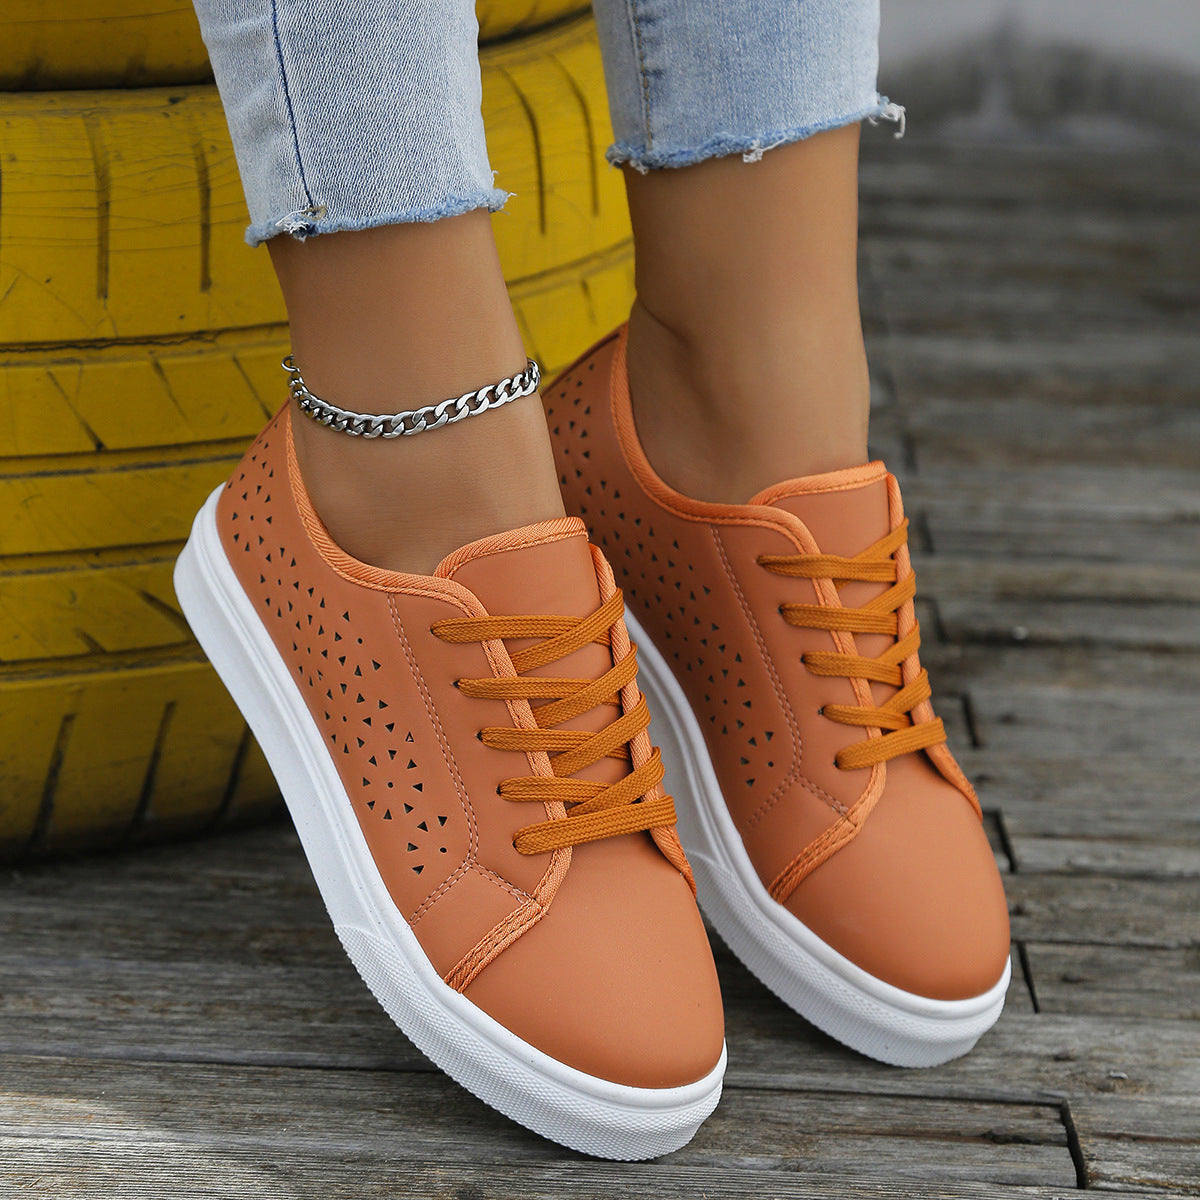 sneakers  | Cutout Flat Shoes Lace-up Hollow Out Walking Shoes For Women Loafers | [option1] |  [option2]| thecurvestory.myshopify.com